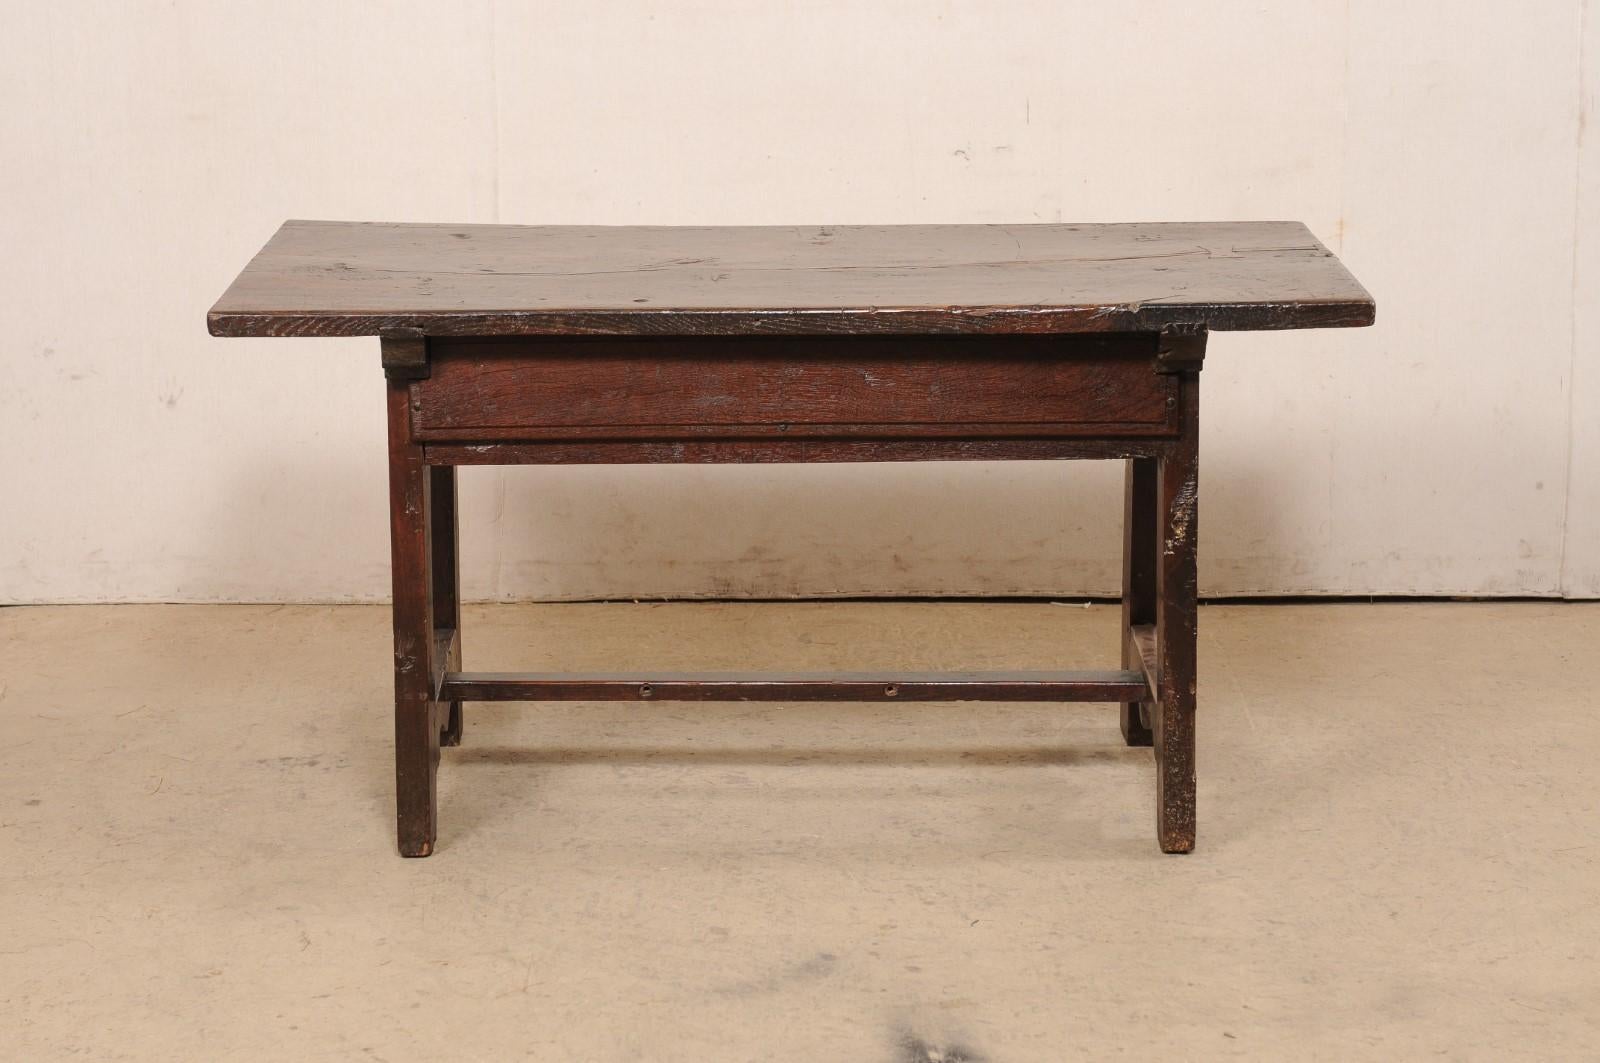 18th C. Spanish Beautifully Rustic Carved-Wood Trestle-Leg Table with Drawers For Sale 4